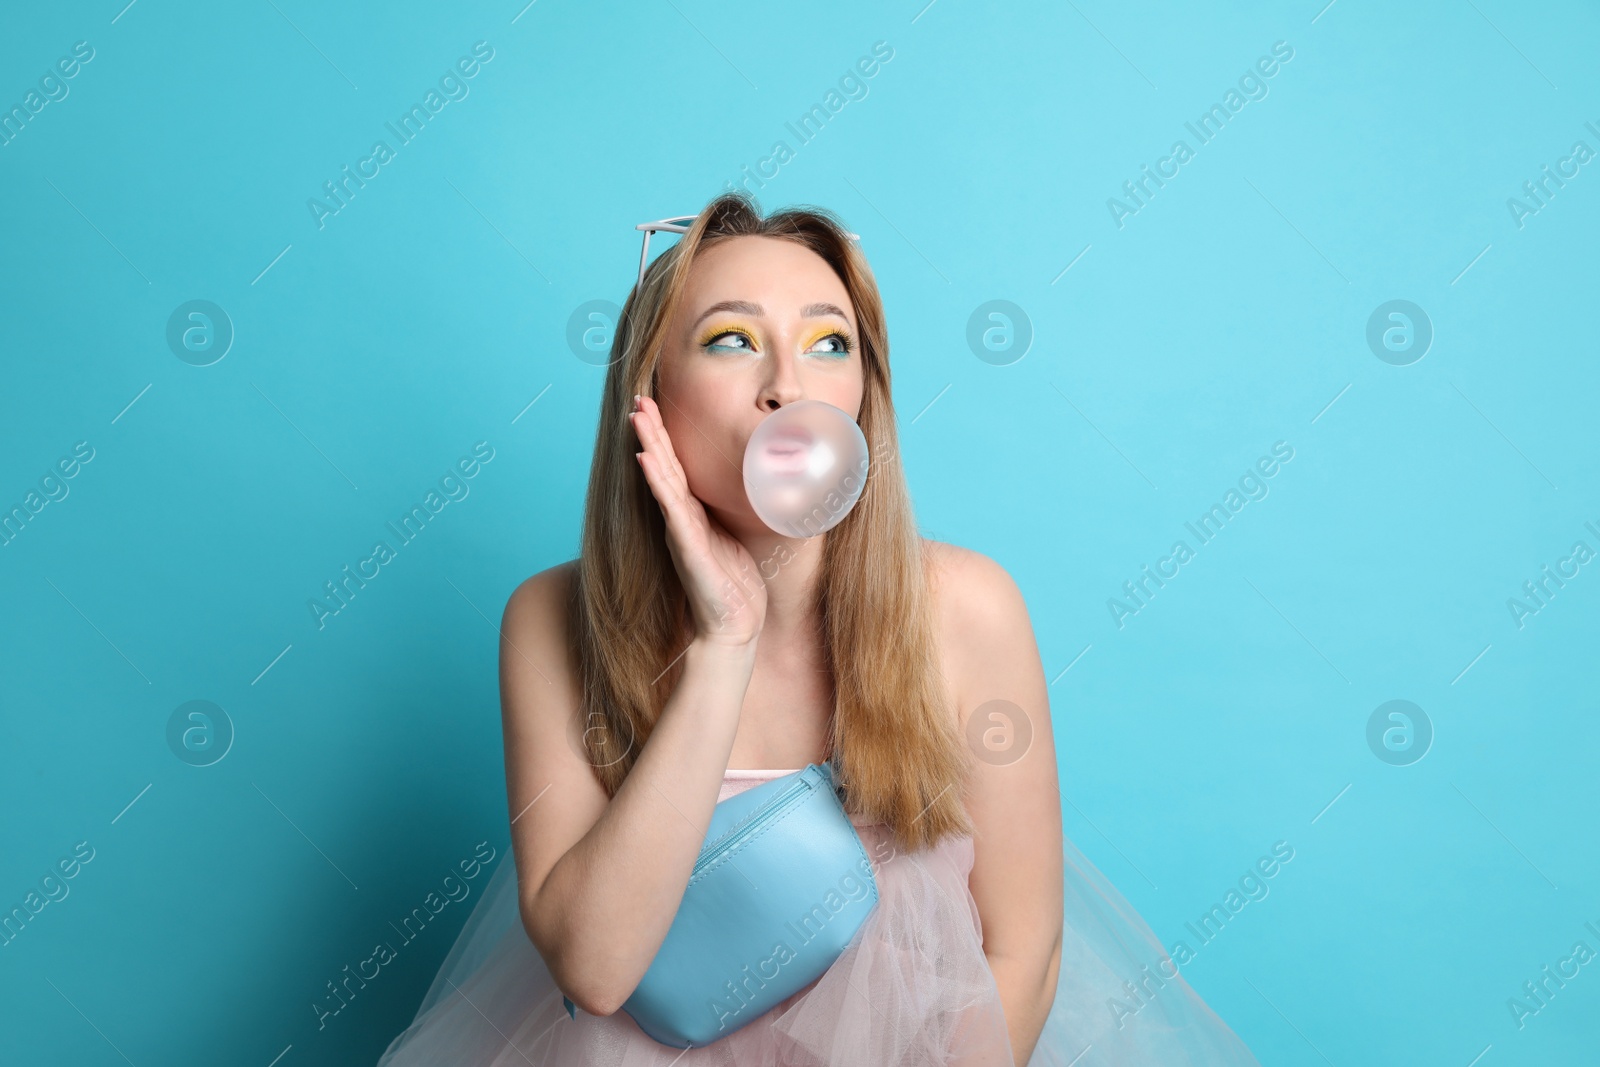 Photo of Fashionable young woman with bright makeup blowing bubblegum on light blue background